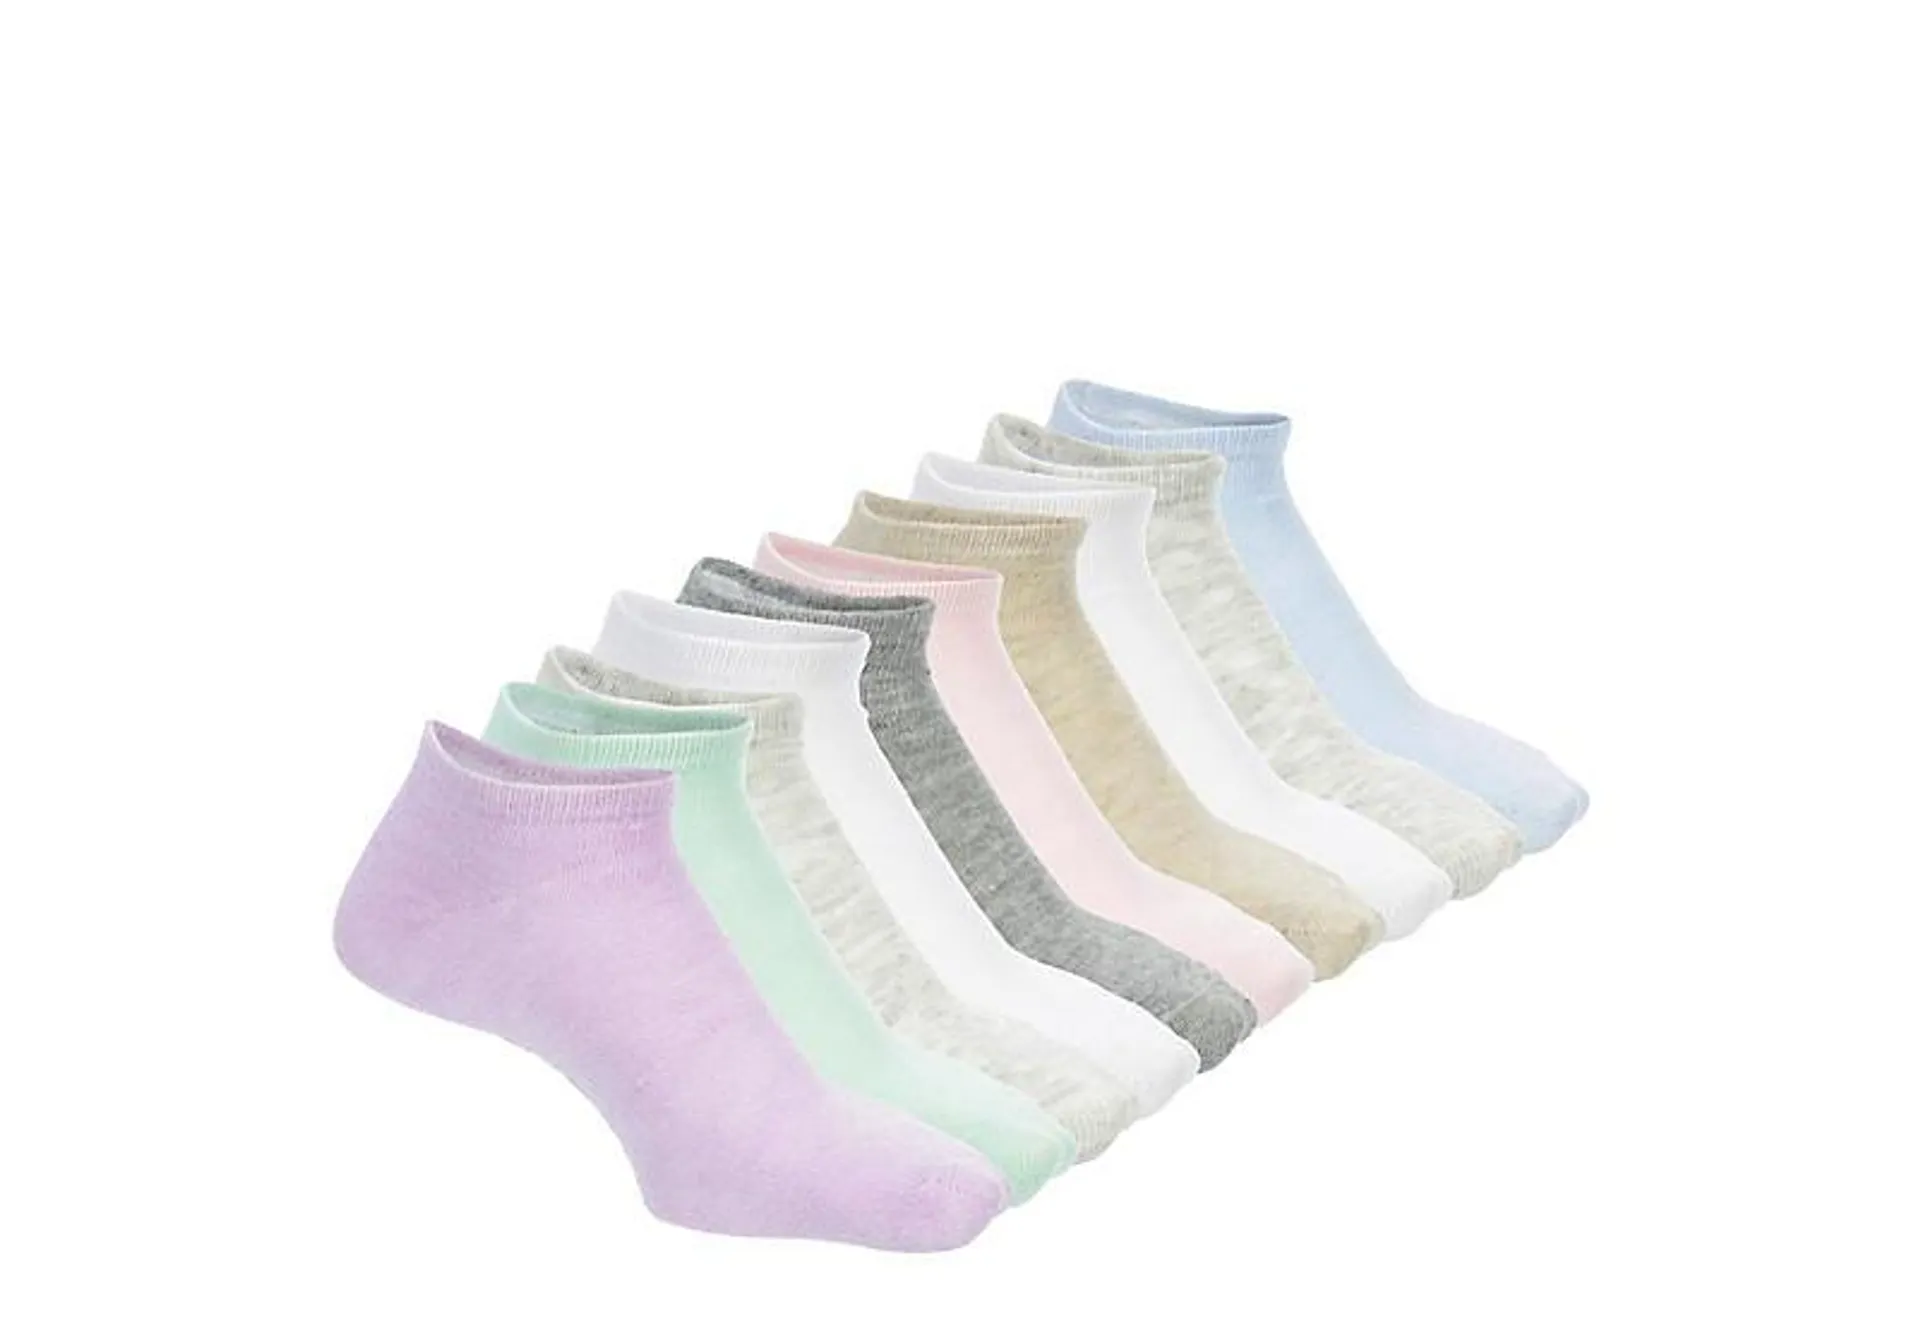 Steve Madden Womens Low Cut Solid Socks 10 Pairs - Multicolor